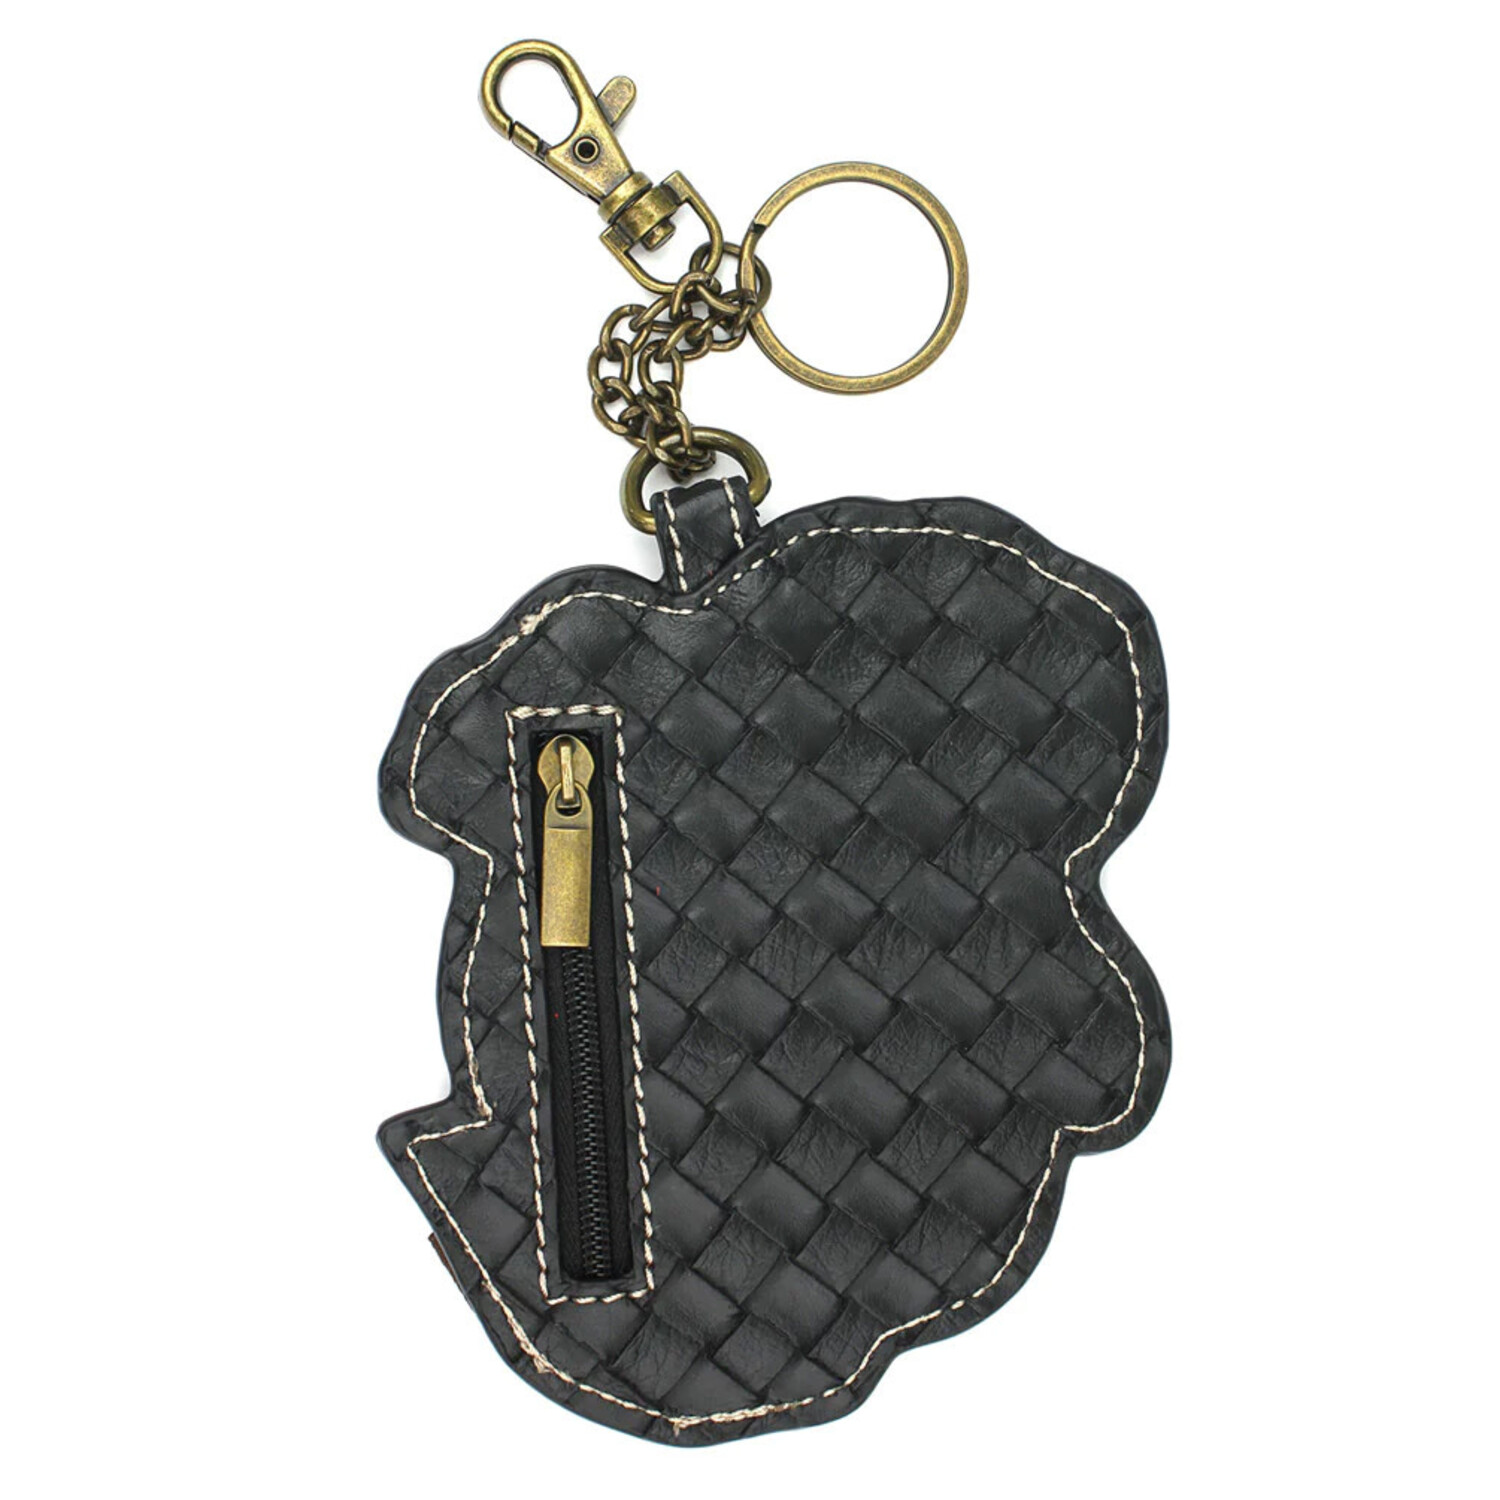 Amazon.com: Studio Oh! Au Pears by CatCoq Key Chain Pouch Coin Purse, 3.5  in x 2 in x 2 in : Clothing, Shoes & Jewelry